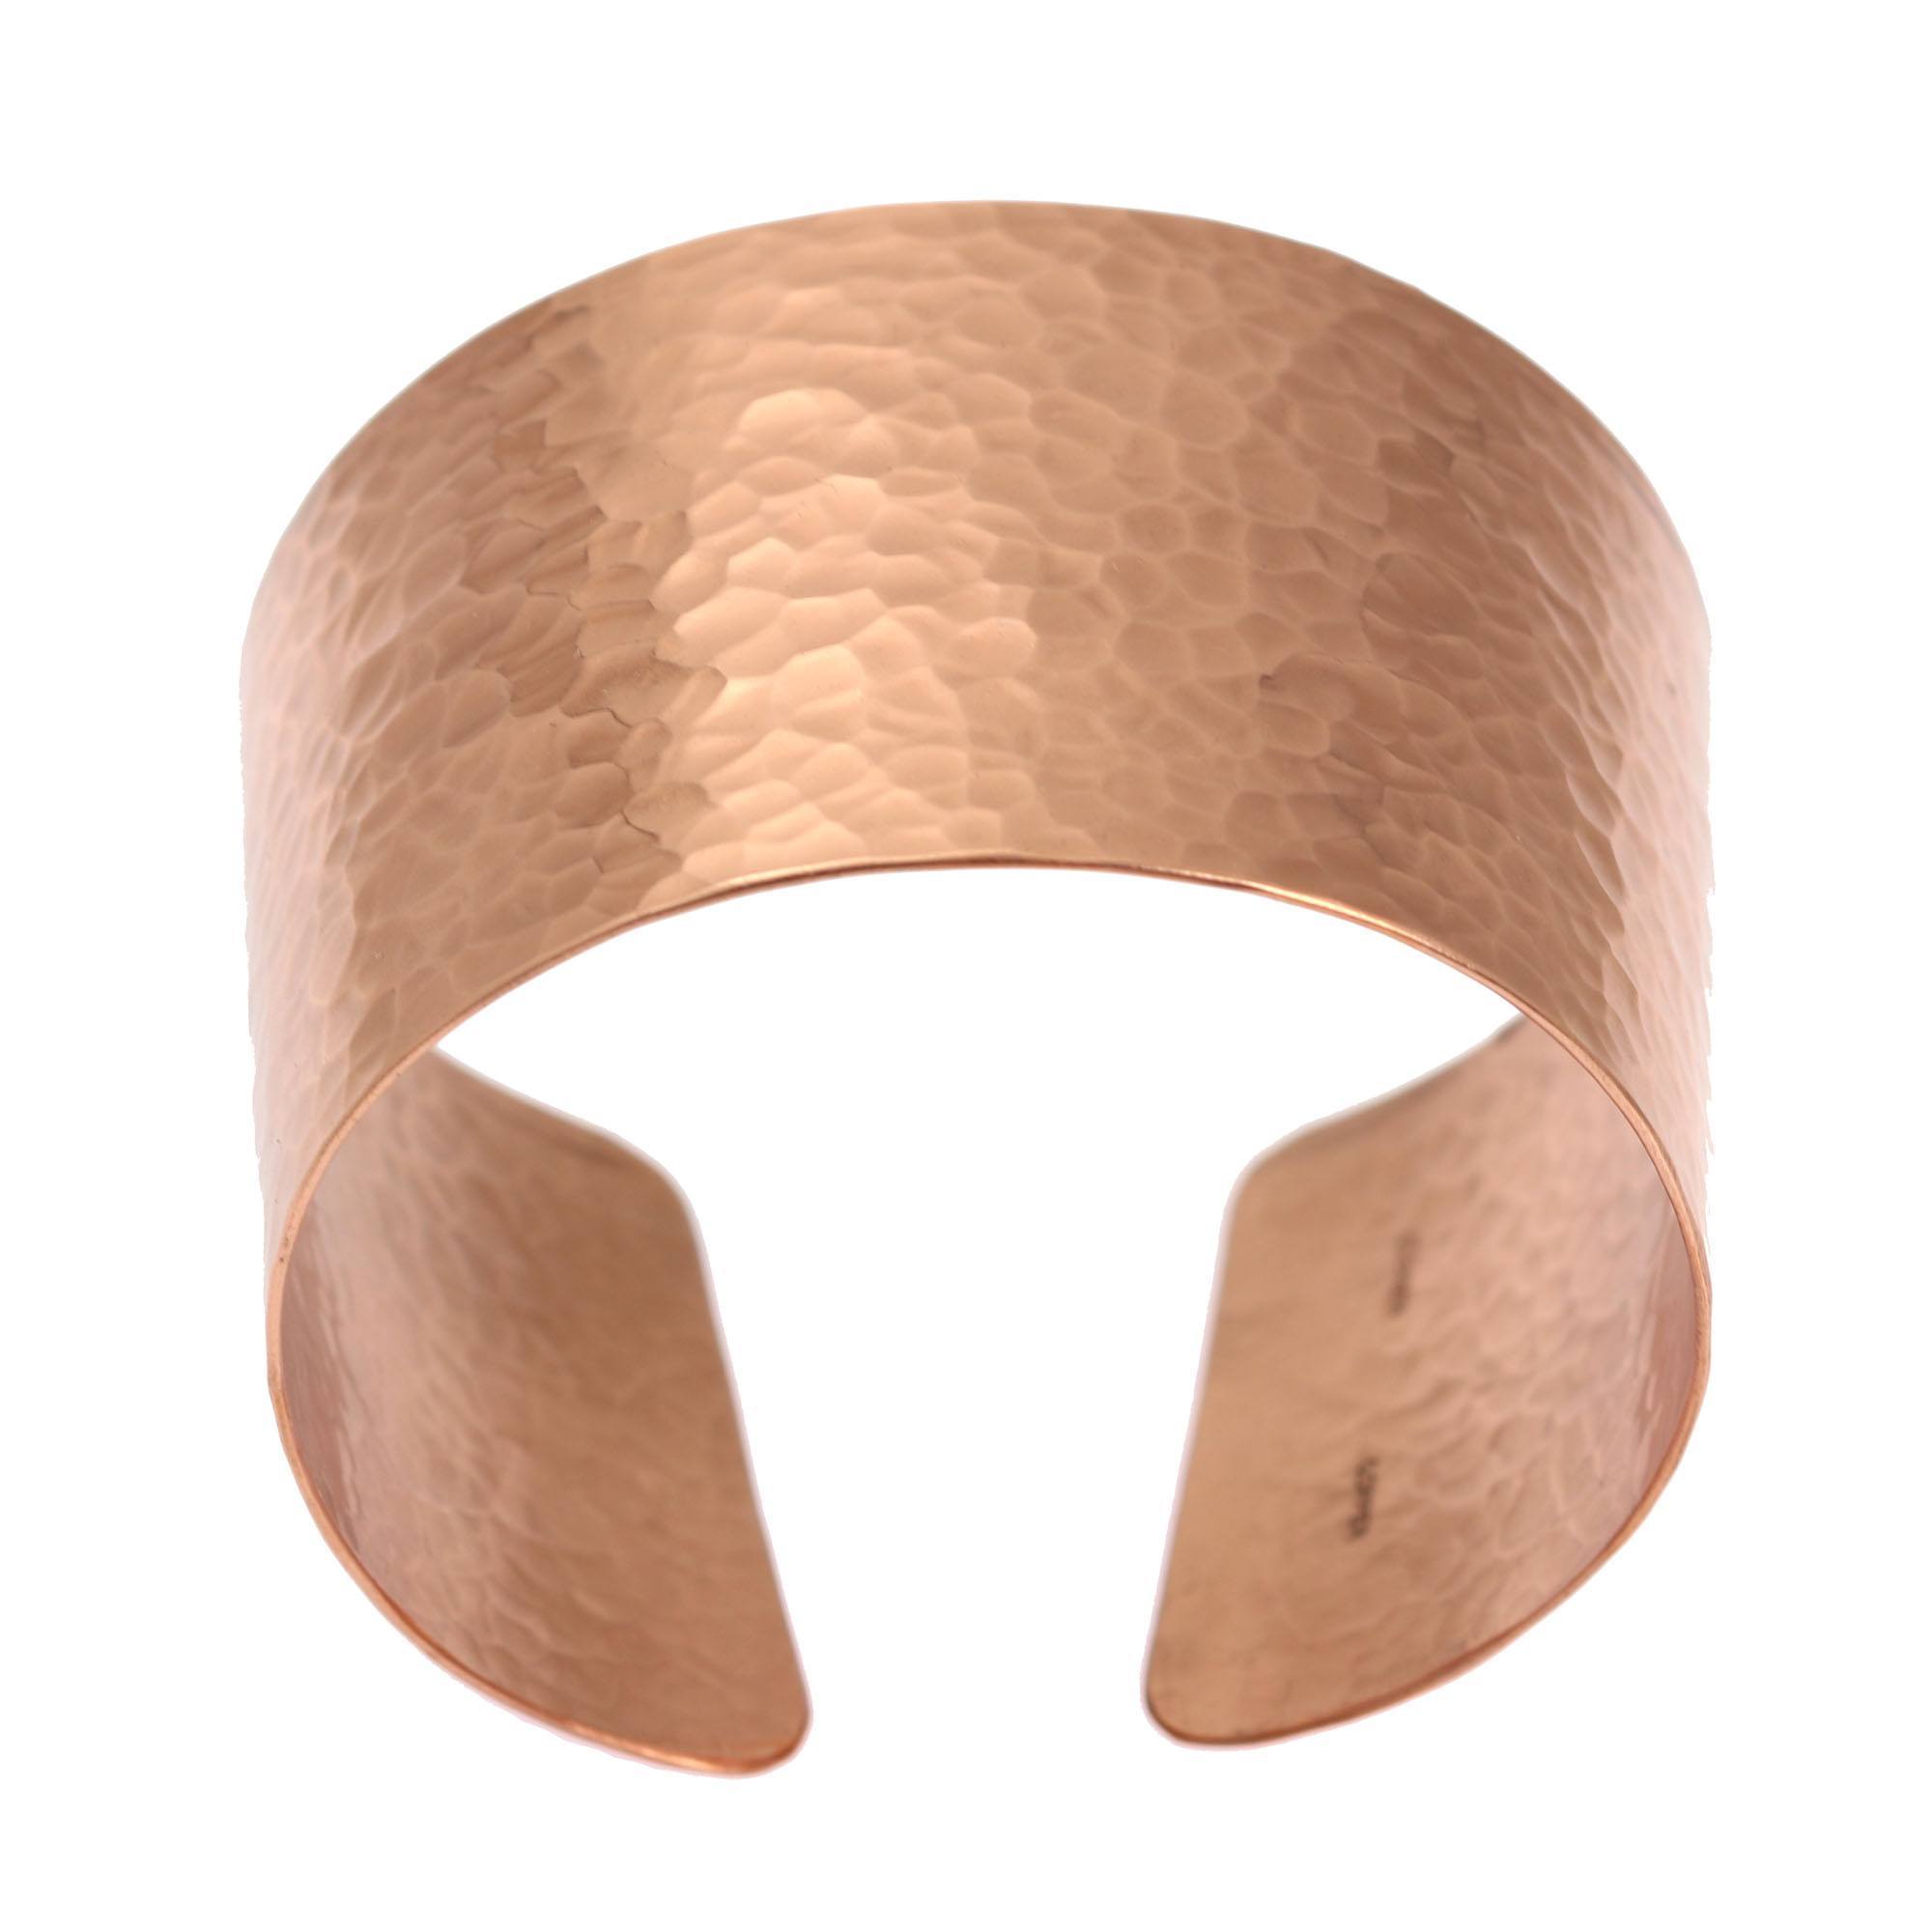 Top View of Hammered Copper Cuff Bracelet